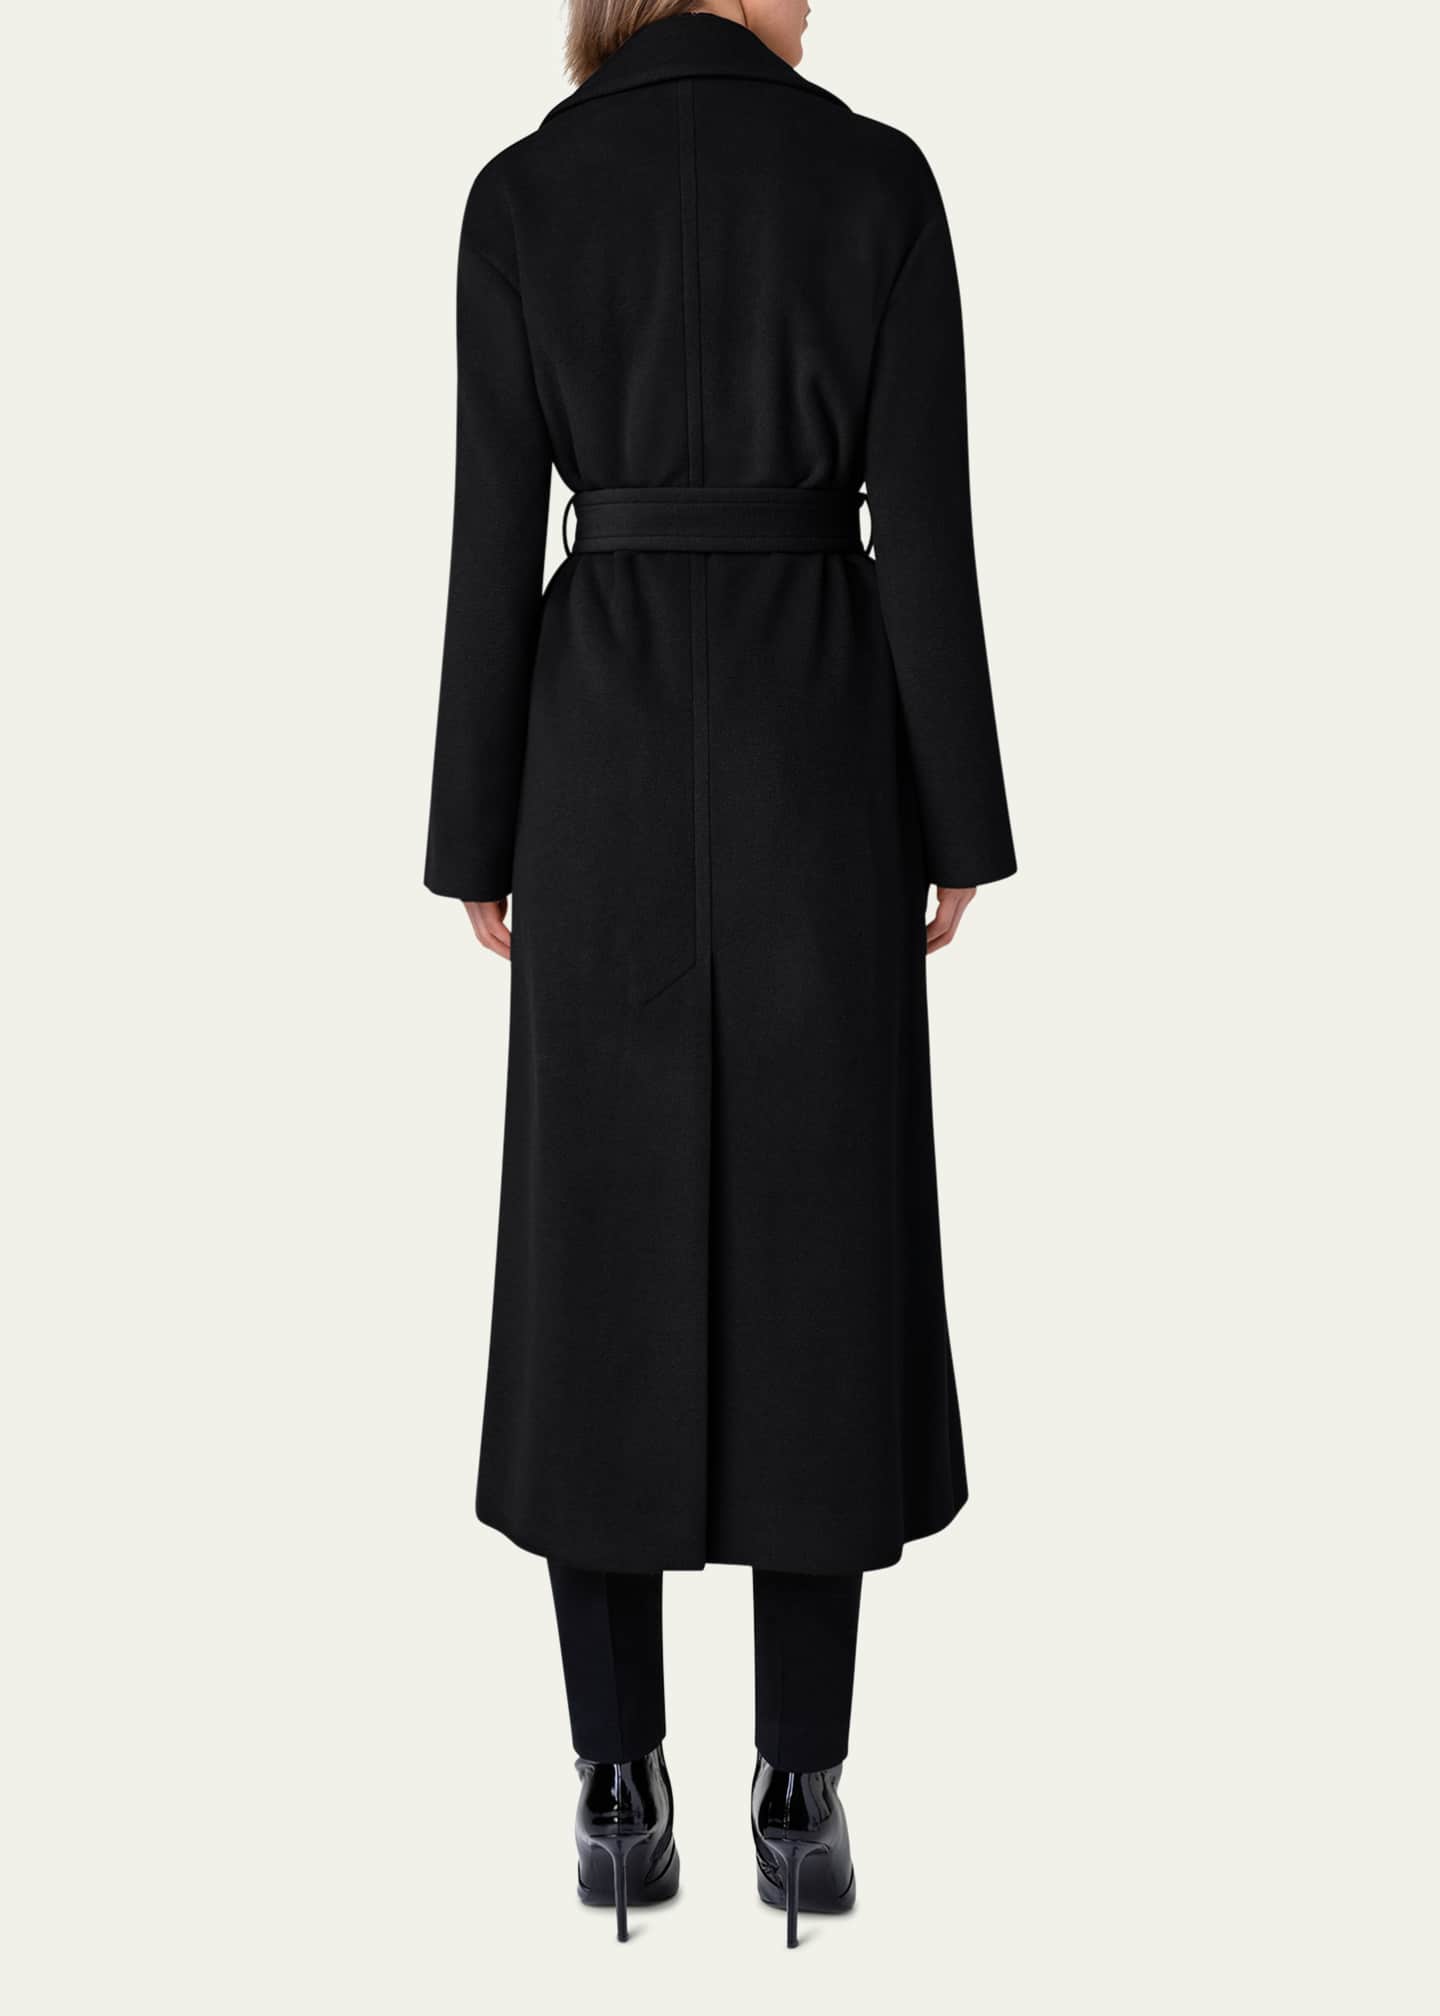 Akris punto Long Double-Breast Belted Wool-Cashmere Coat - Bergdorf Goodman